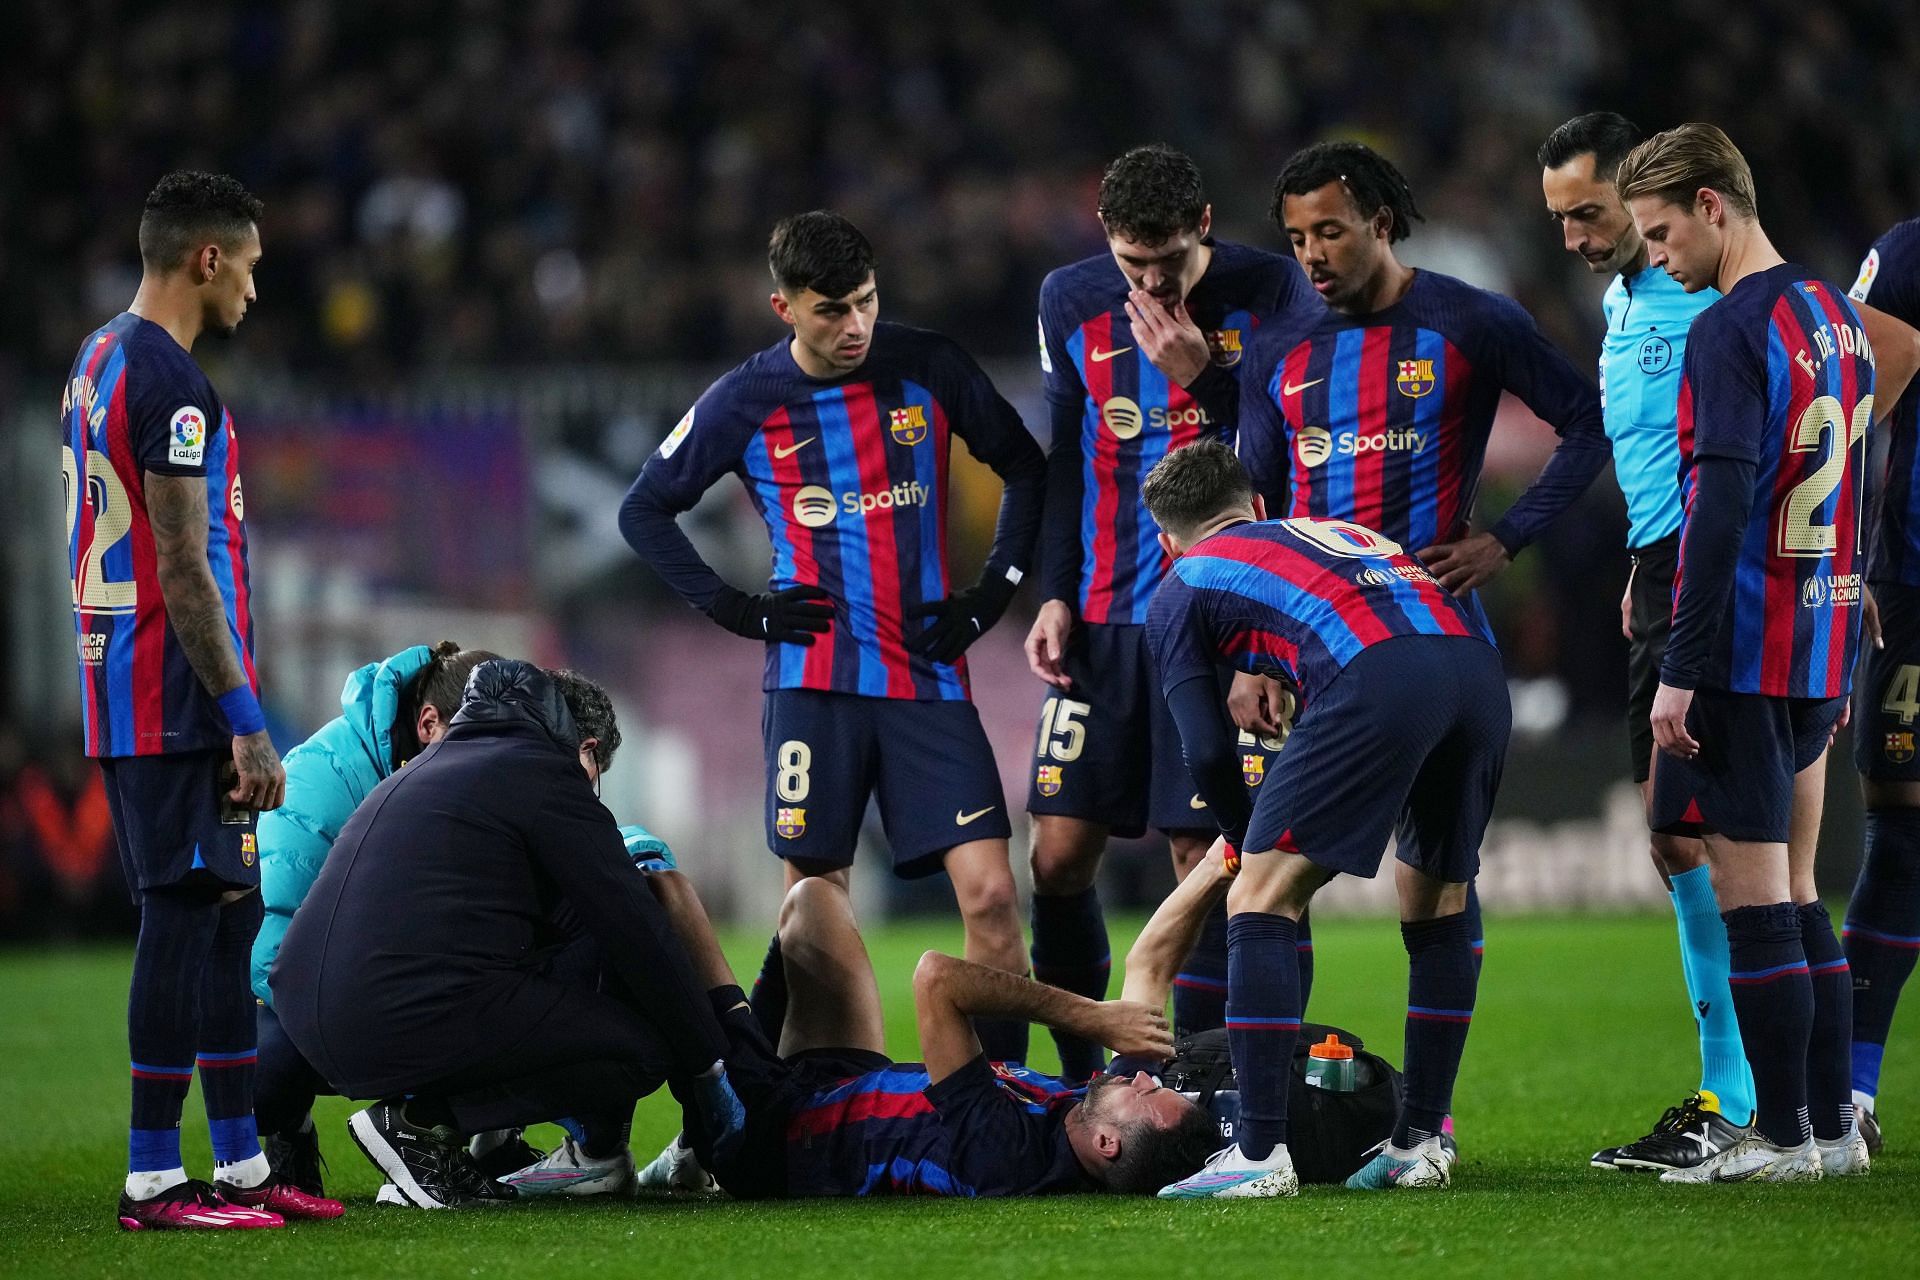 Sergio Busquets picked up an early injury.